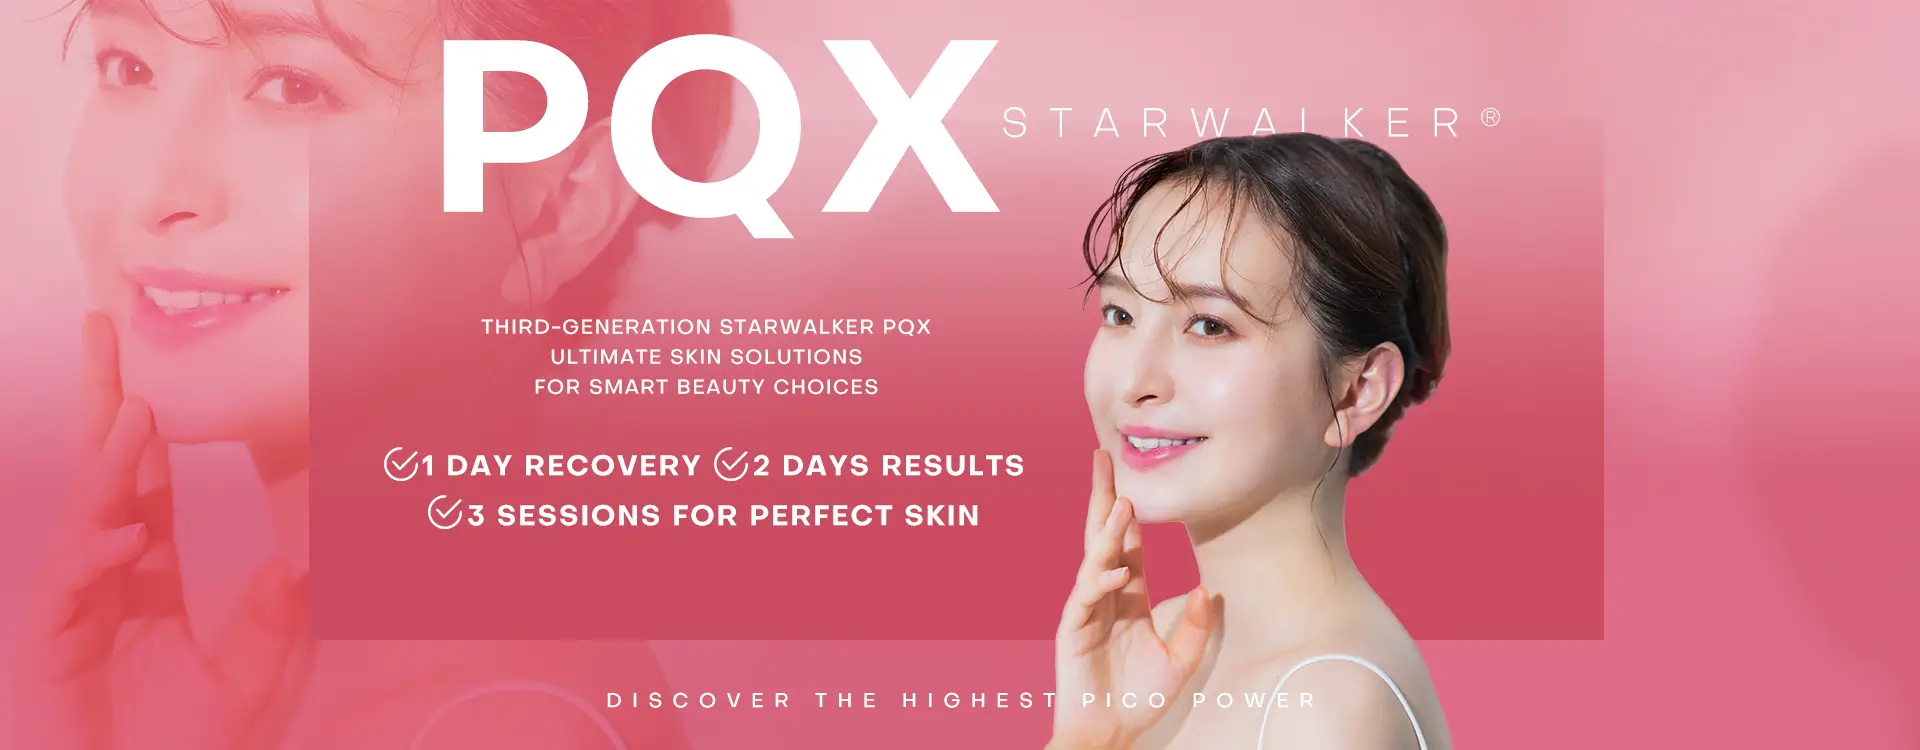 StarWalker PQX – Ultimate Skin Solutions for Smart Beauty Choices